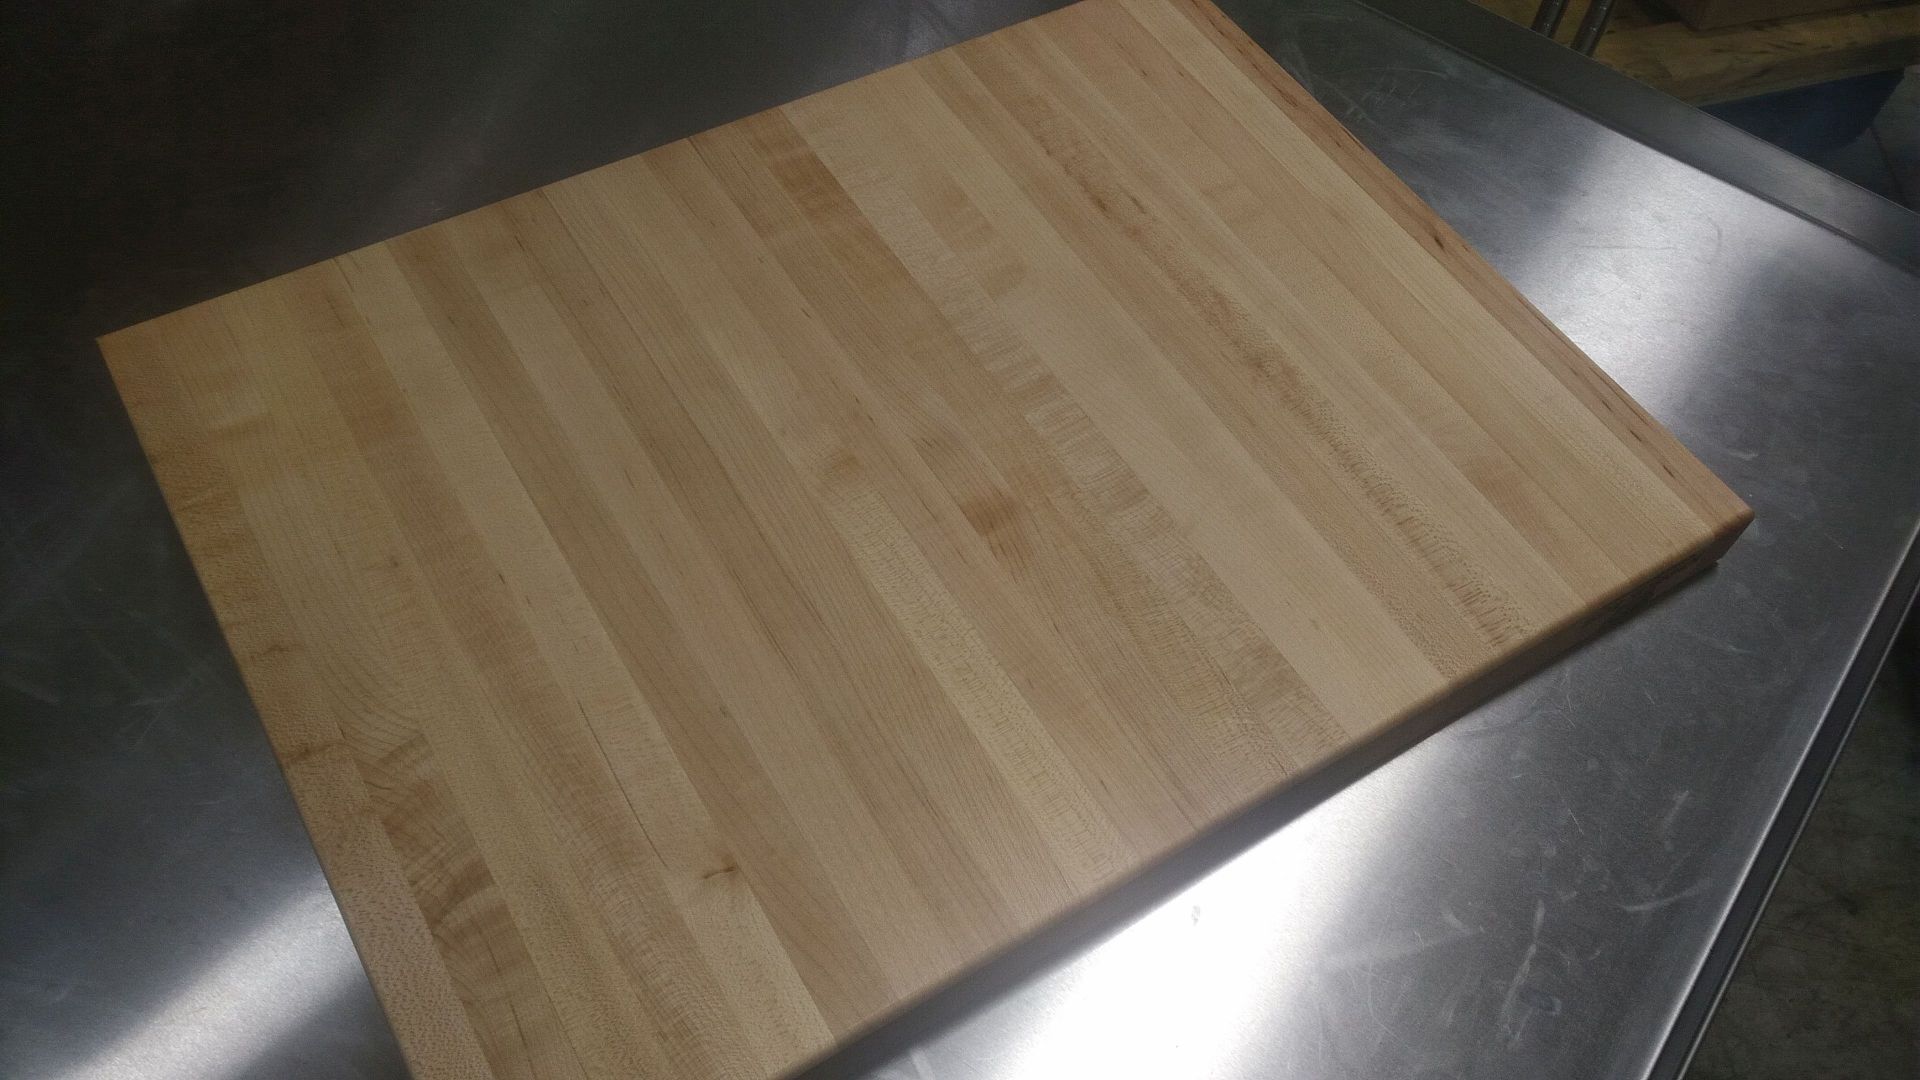 20" x 15" x 1.5" Hard Canadian Maple Solid Carving Board - Image 2 of 2